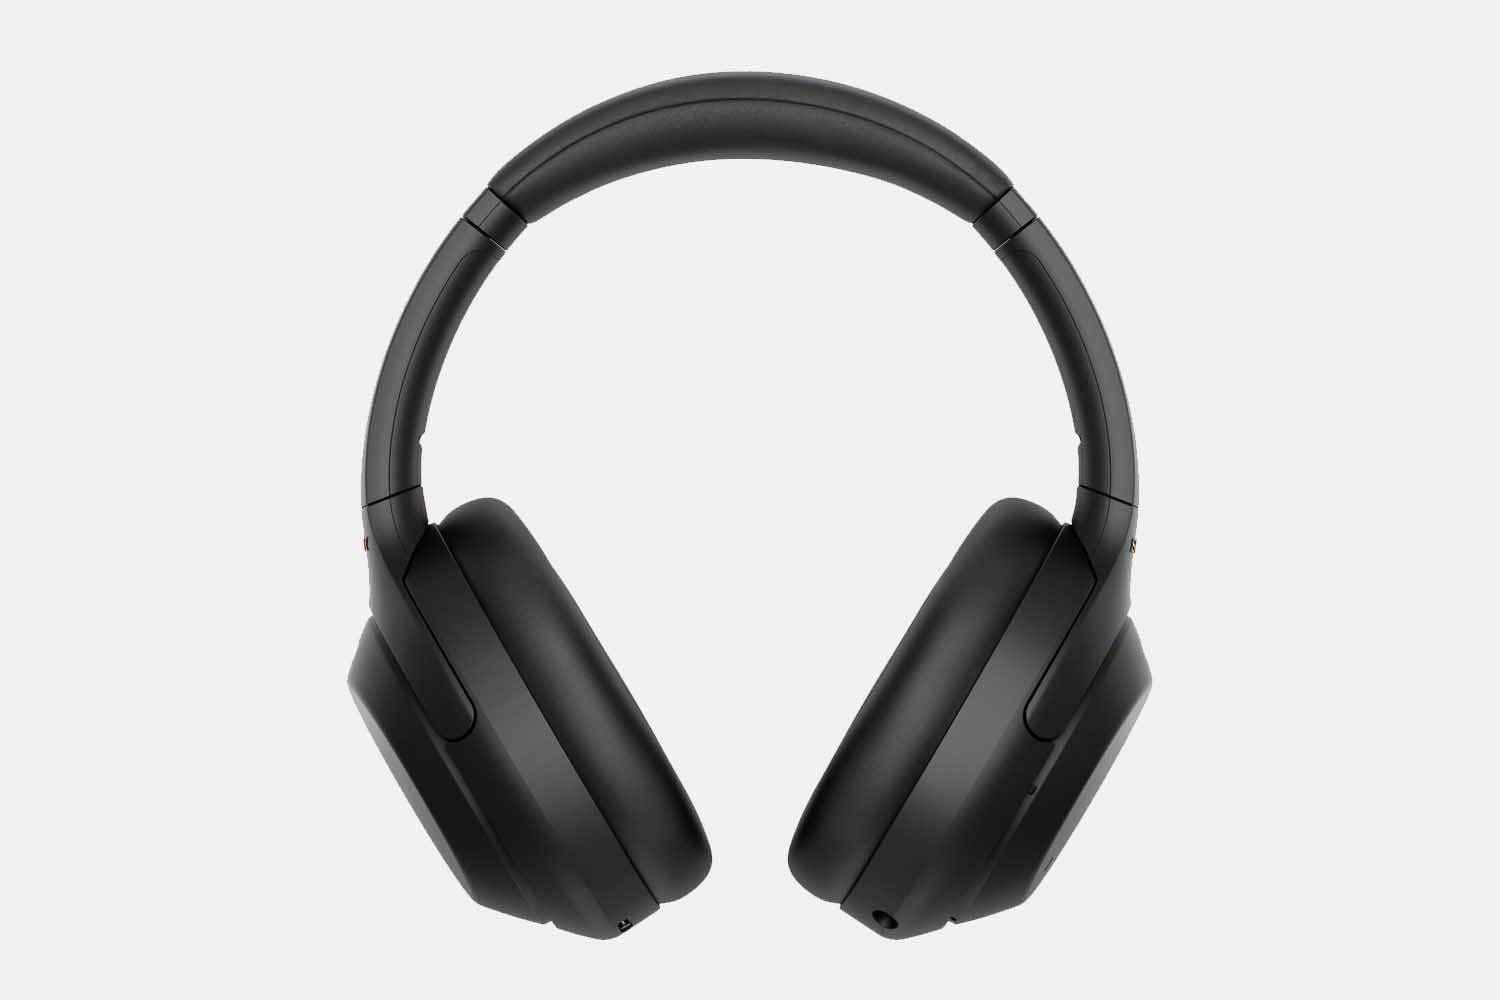 Deal: These Noise-Cancelling Headphones Are Under $200 - InsideHook